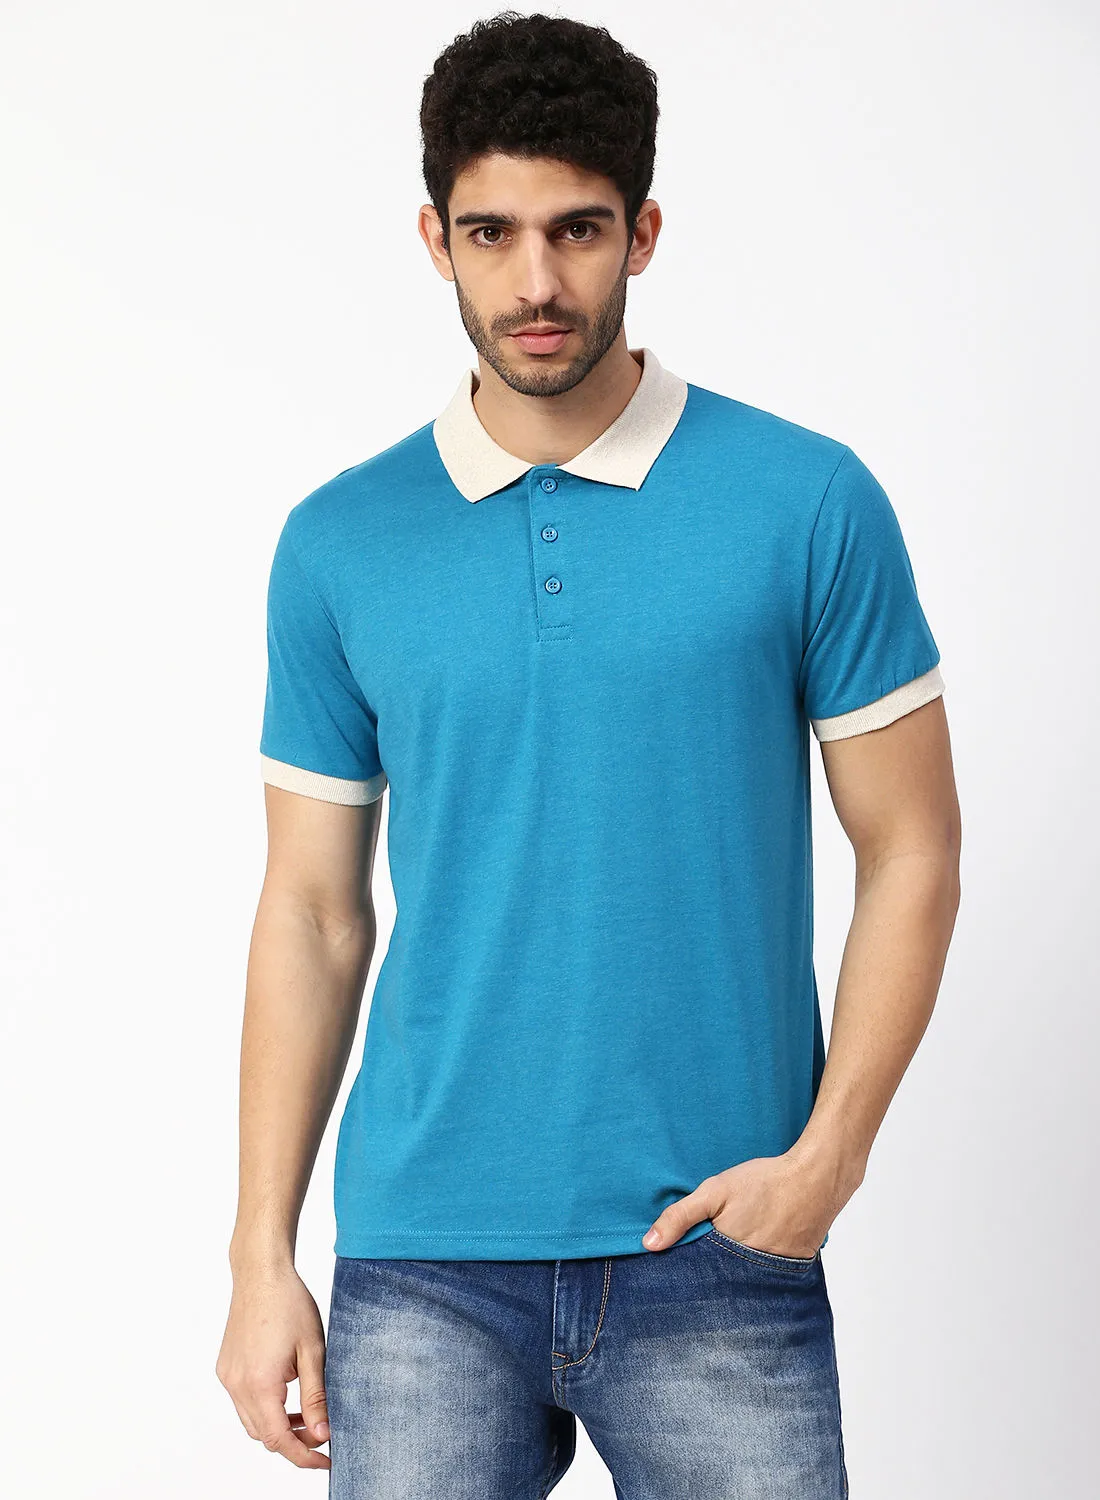 Noon East Men's Basic Casual Polo Neck Cotton Comfort Fit Half Sleeve T-Shirt Heather Light Blue